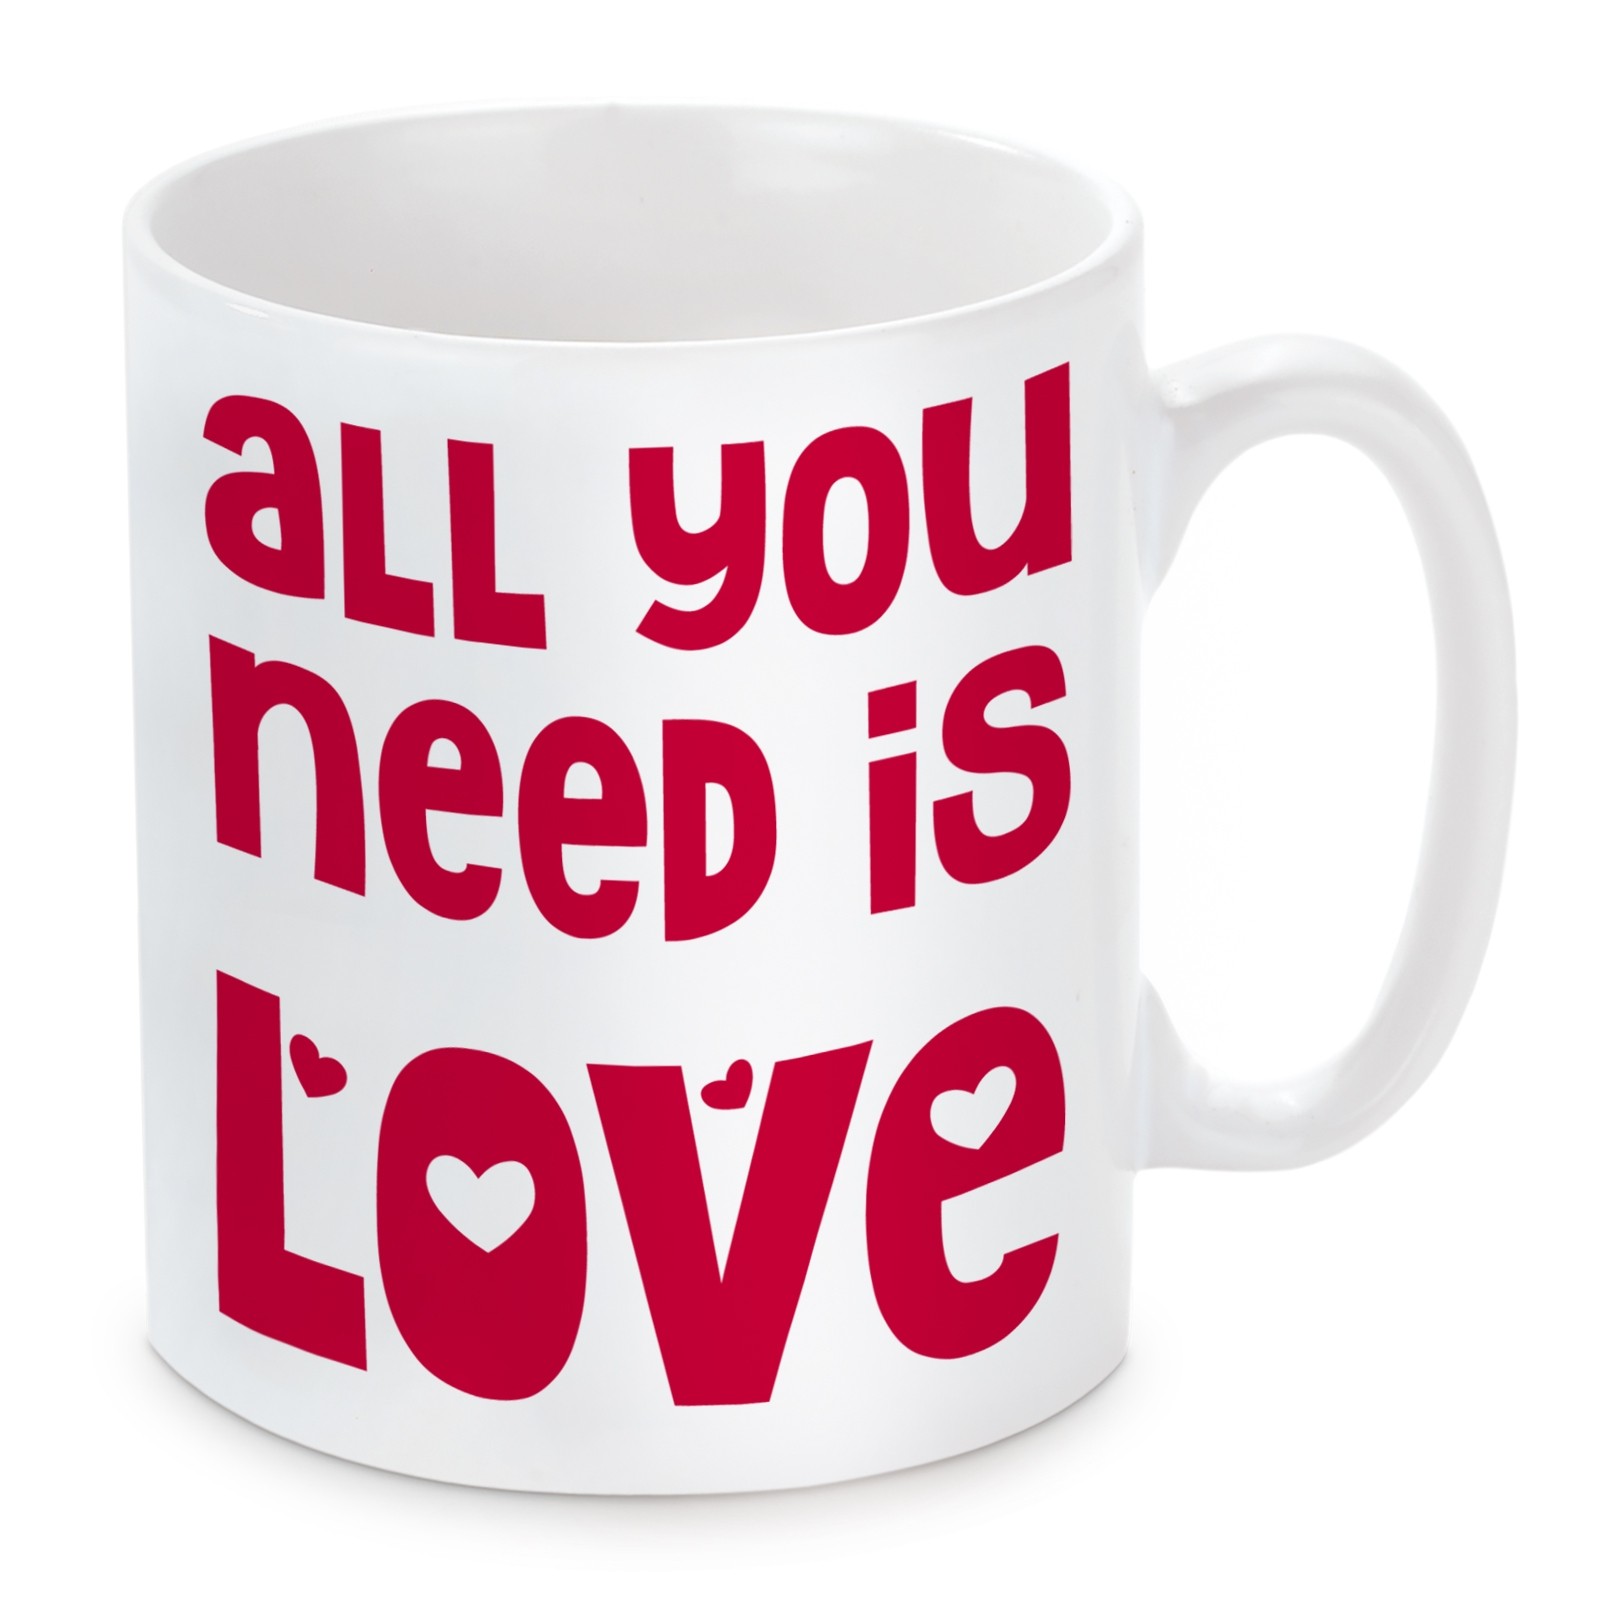 Tasse: All you need is love